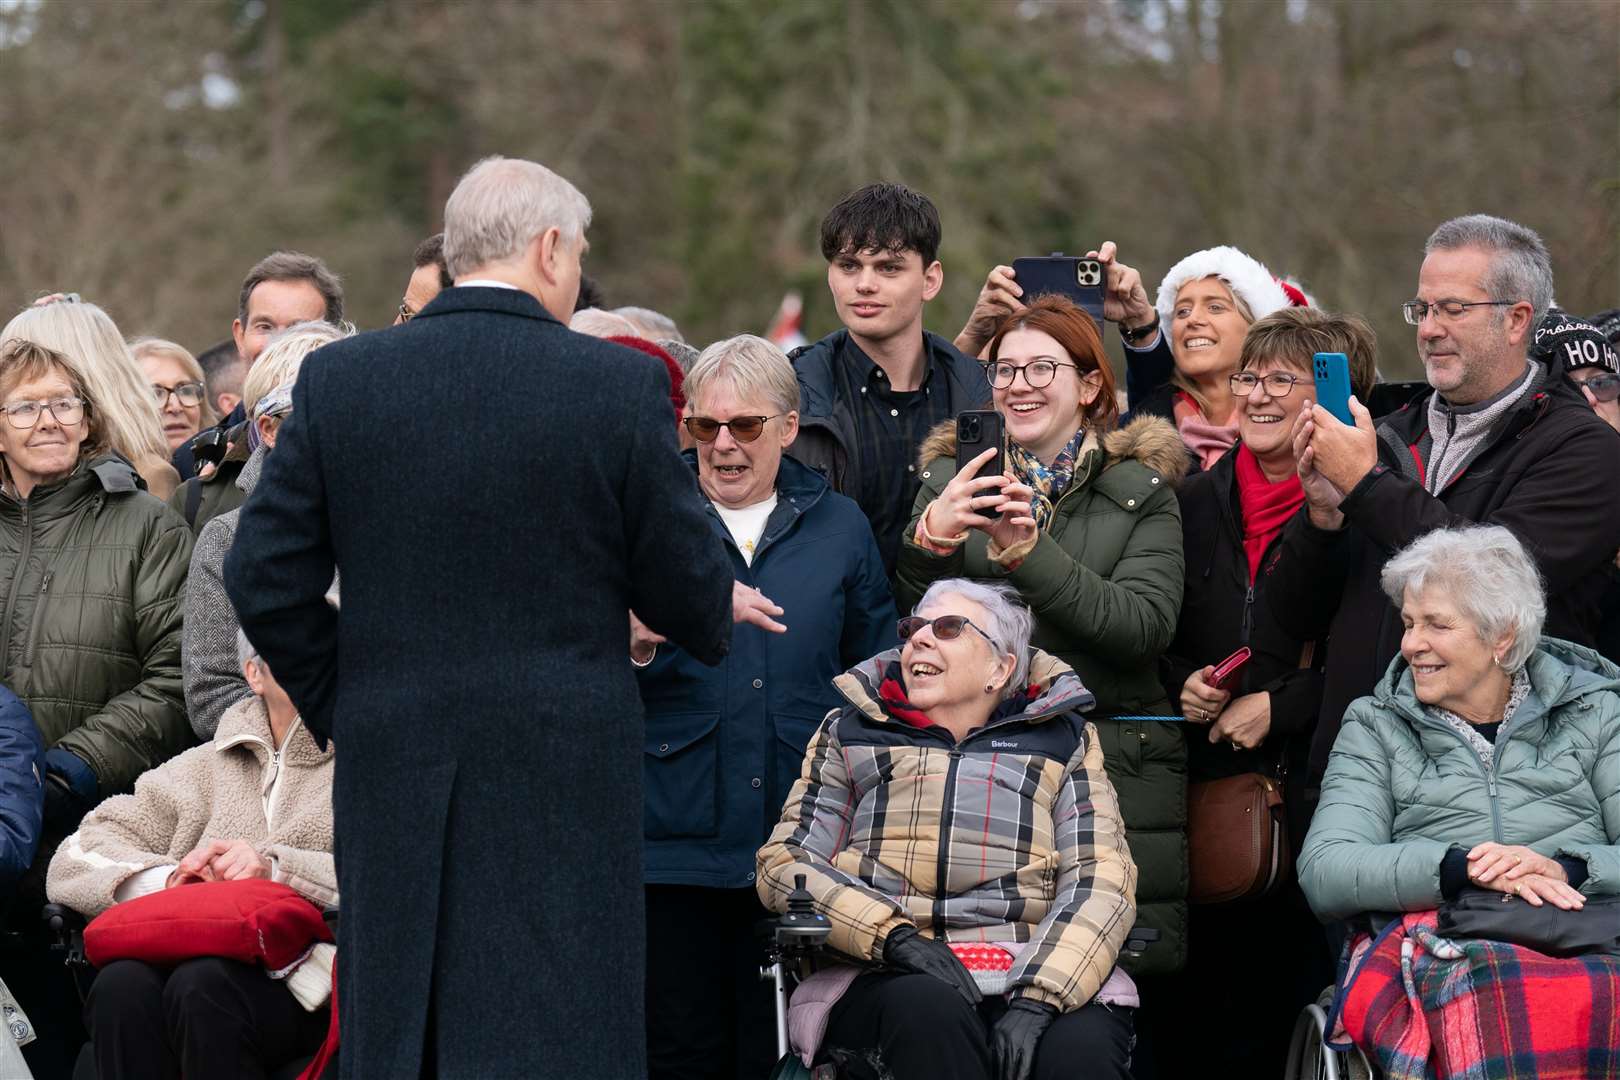 The Duke of York meets well-wishers after attending the service at St Mary Magdalene Church in Sandringham (Joe Giddens/PA Wire)